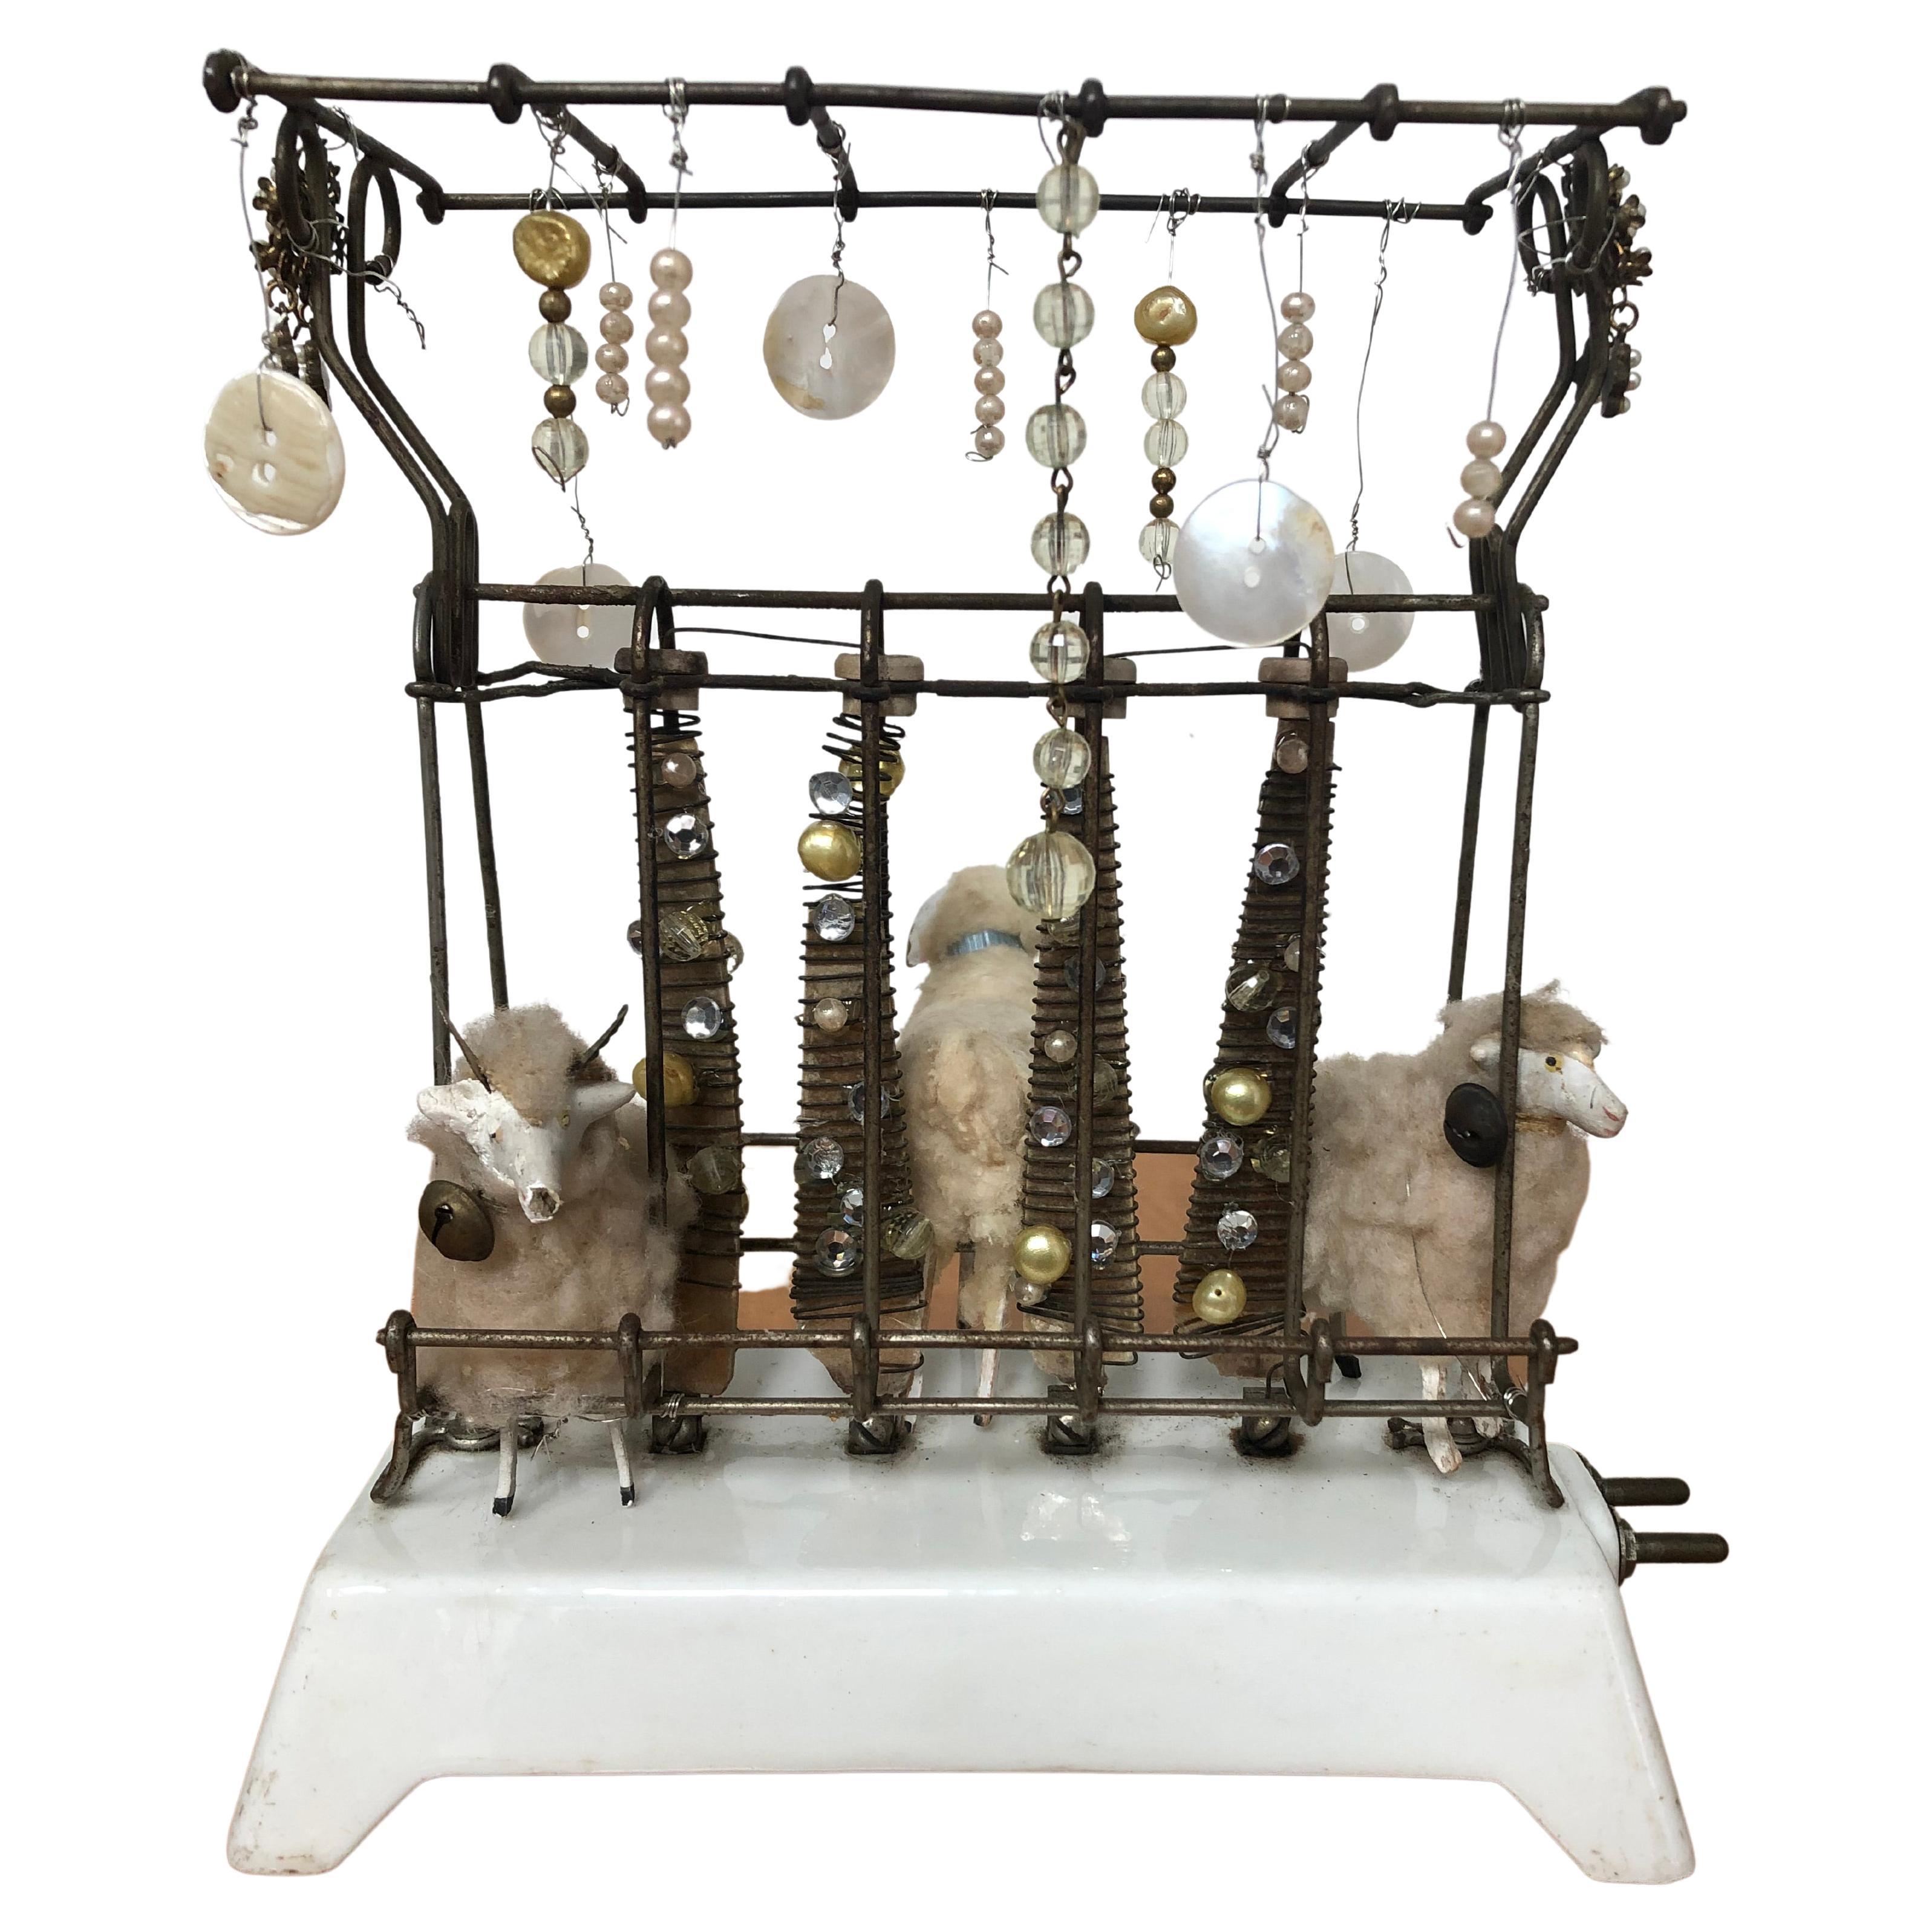 Whimsical Original Mixed Media Tabletop Sculpture on Vintage Toaster For Sale